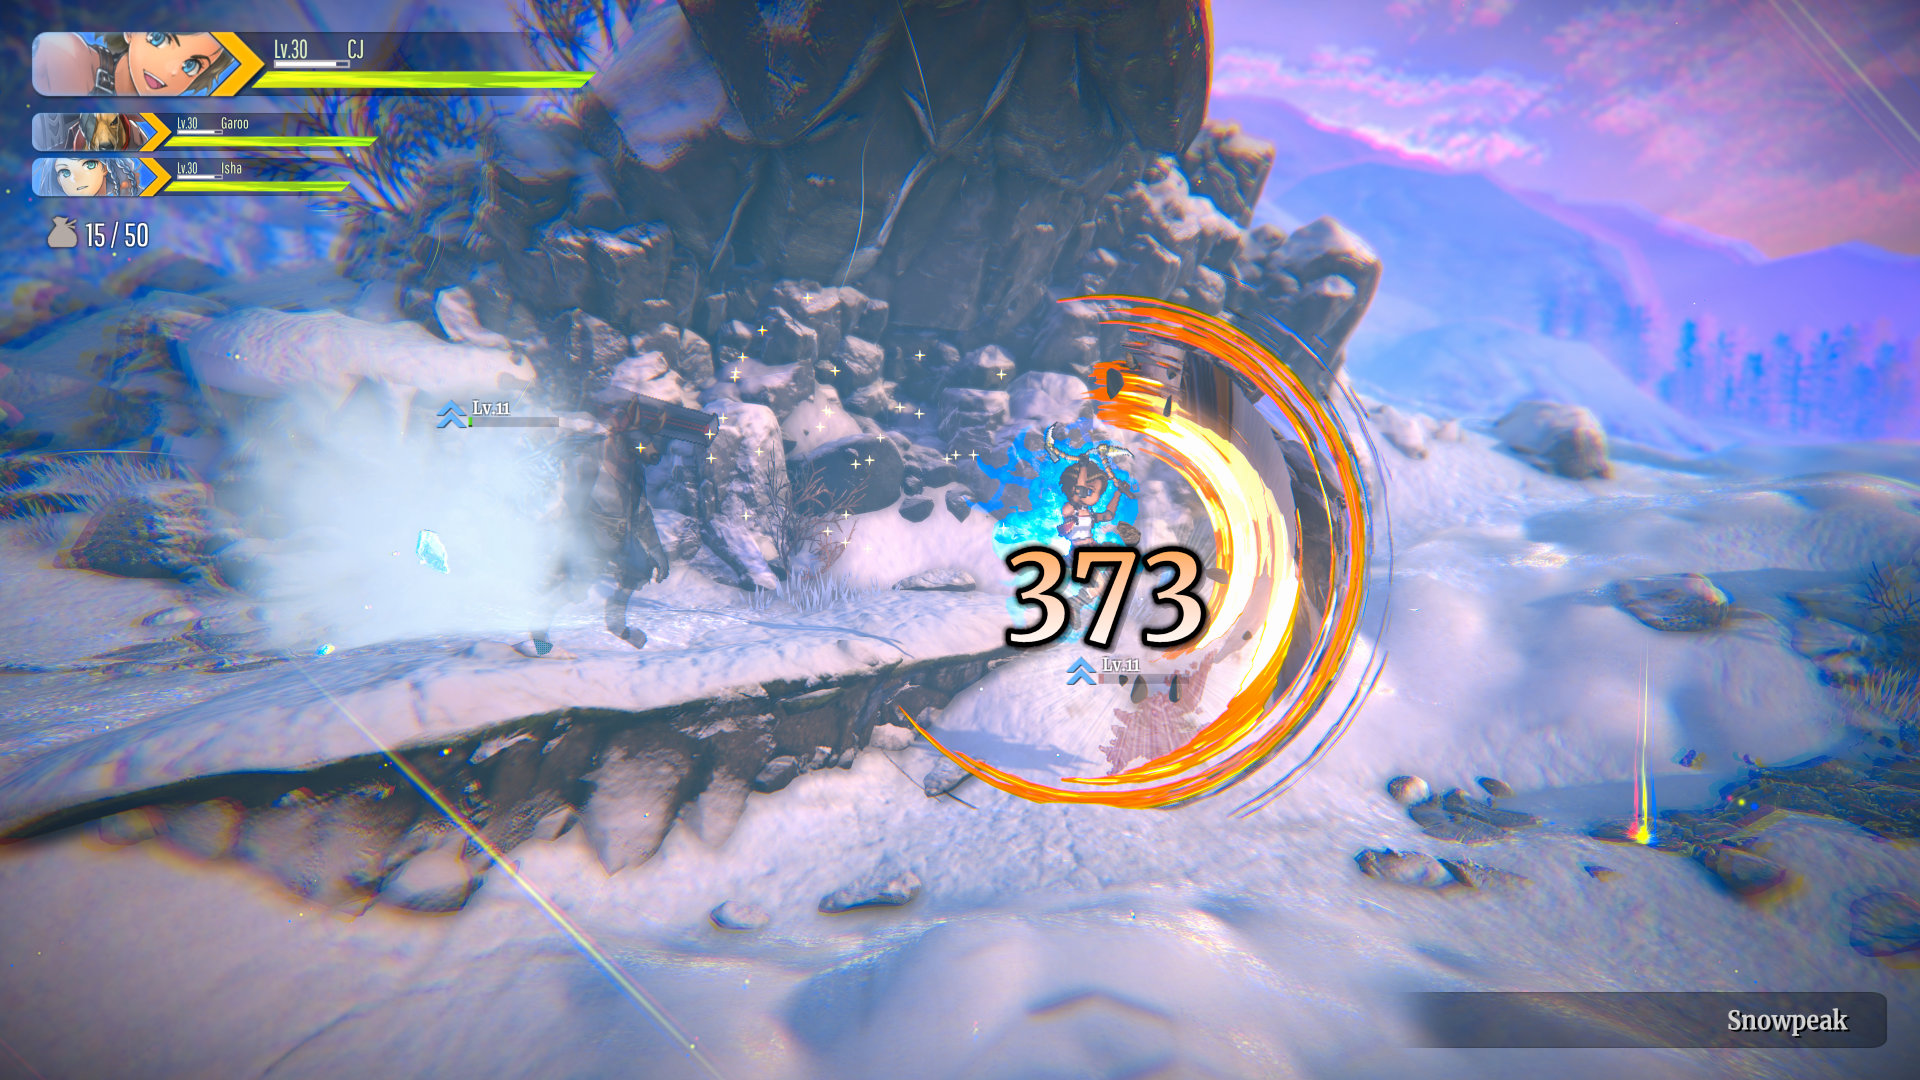 Eiyuden Chronicle: Rising Screenshot of a character leaping into a monster with a spinning attach from two blade-like weapons in a snowy mountain setting